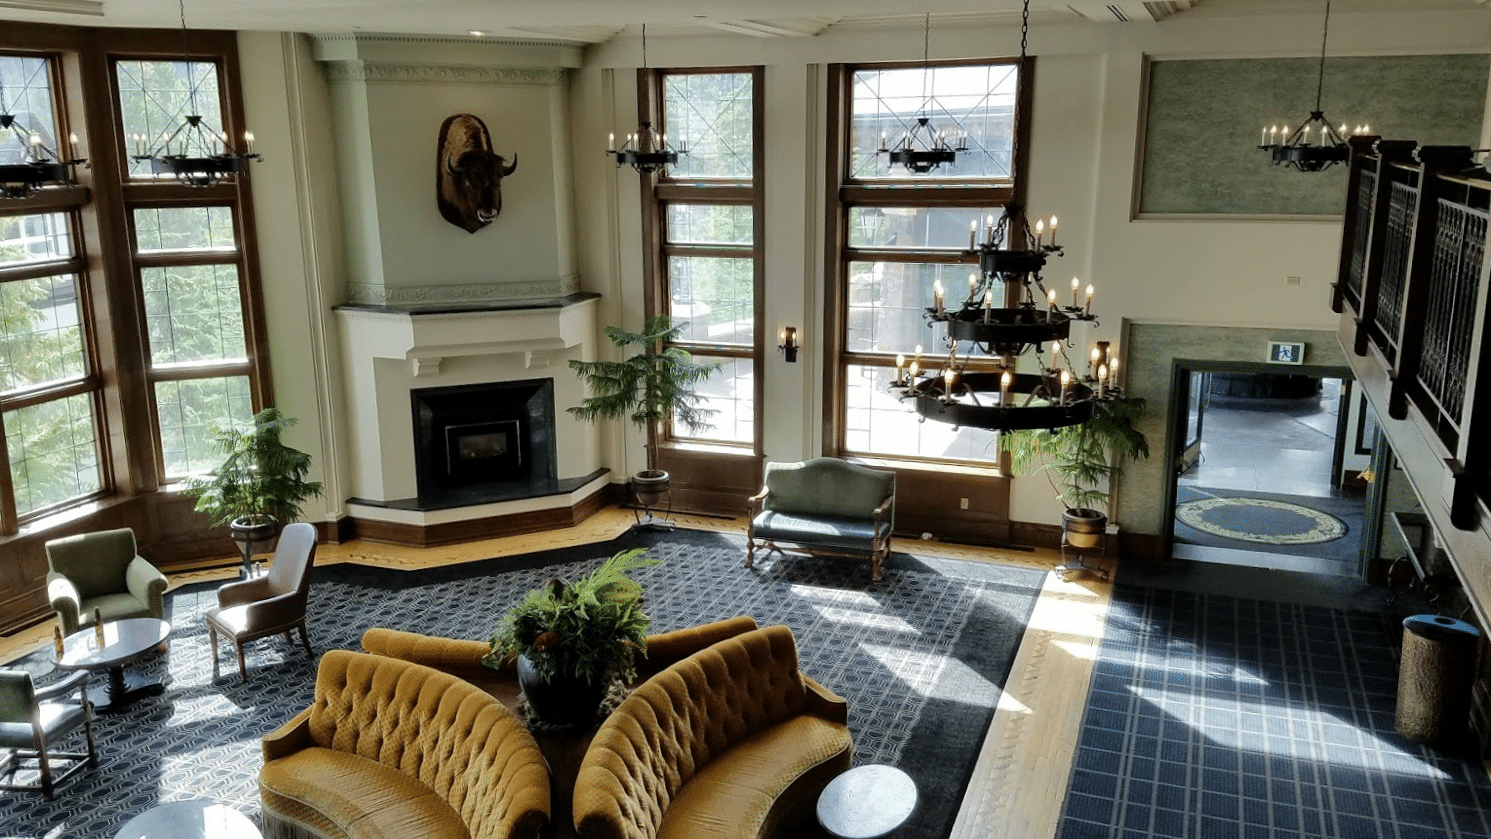 A parlor with Buffalo head over the fireplace at the Banff Springs Hotel 